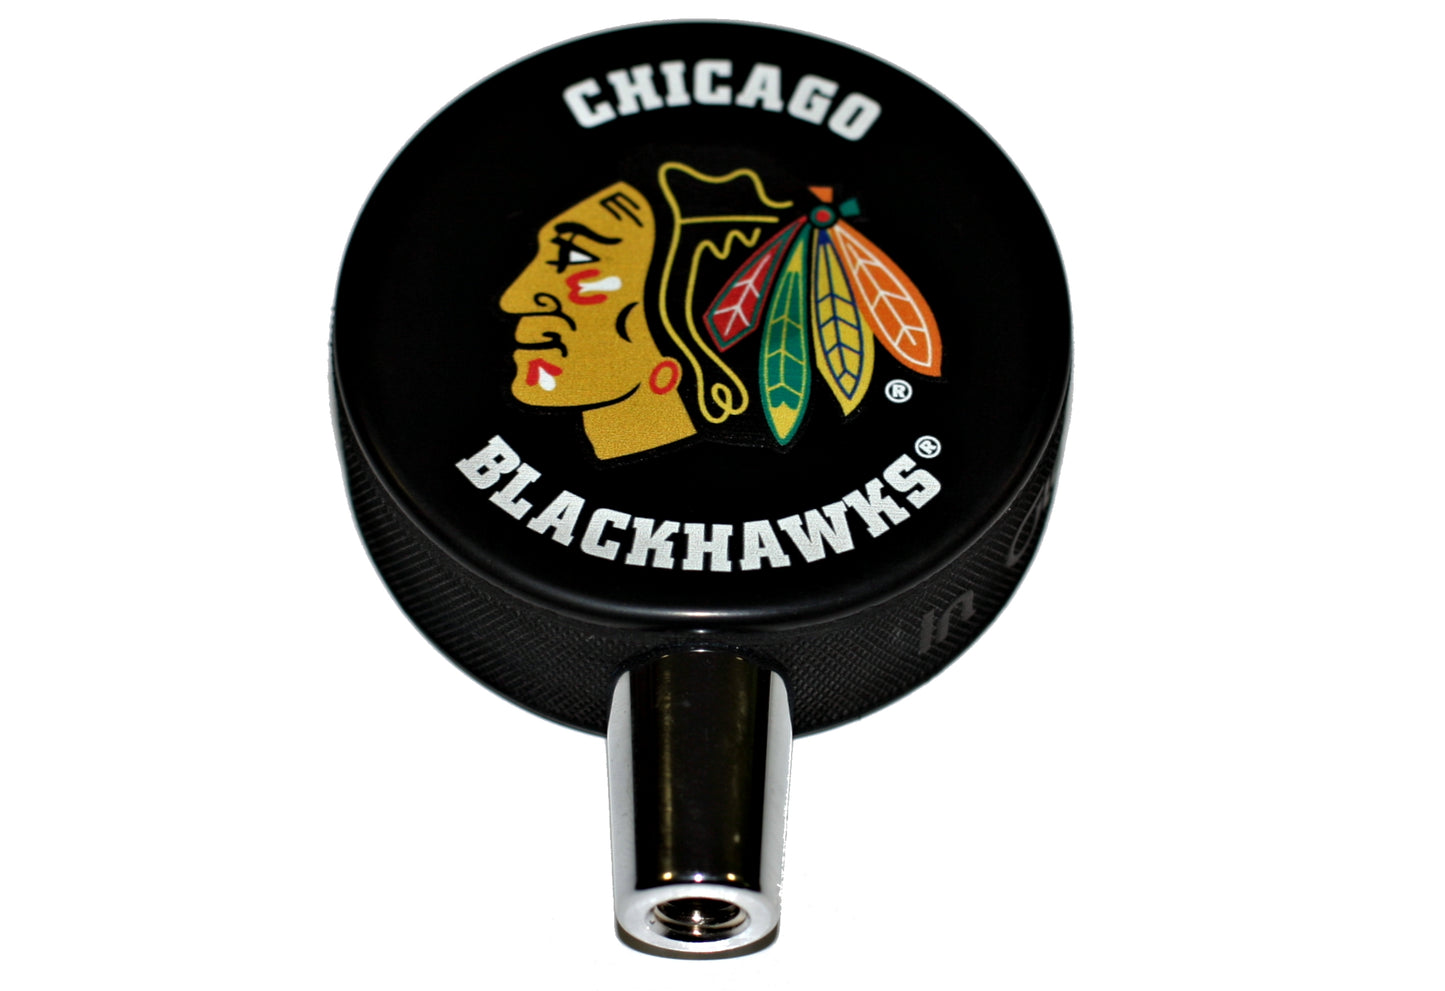 Chicago Blackhawks Hockey Puck And Chicago Cubs Baseball Beer Tap Handle Set